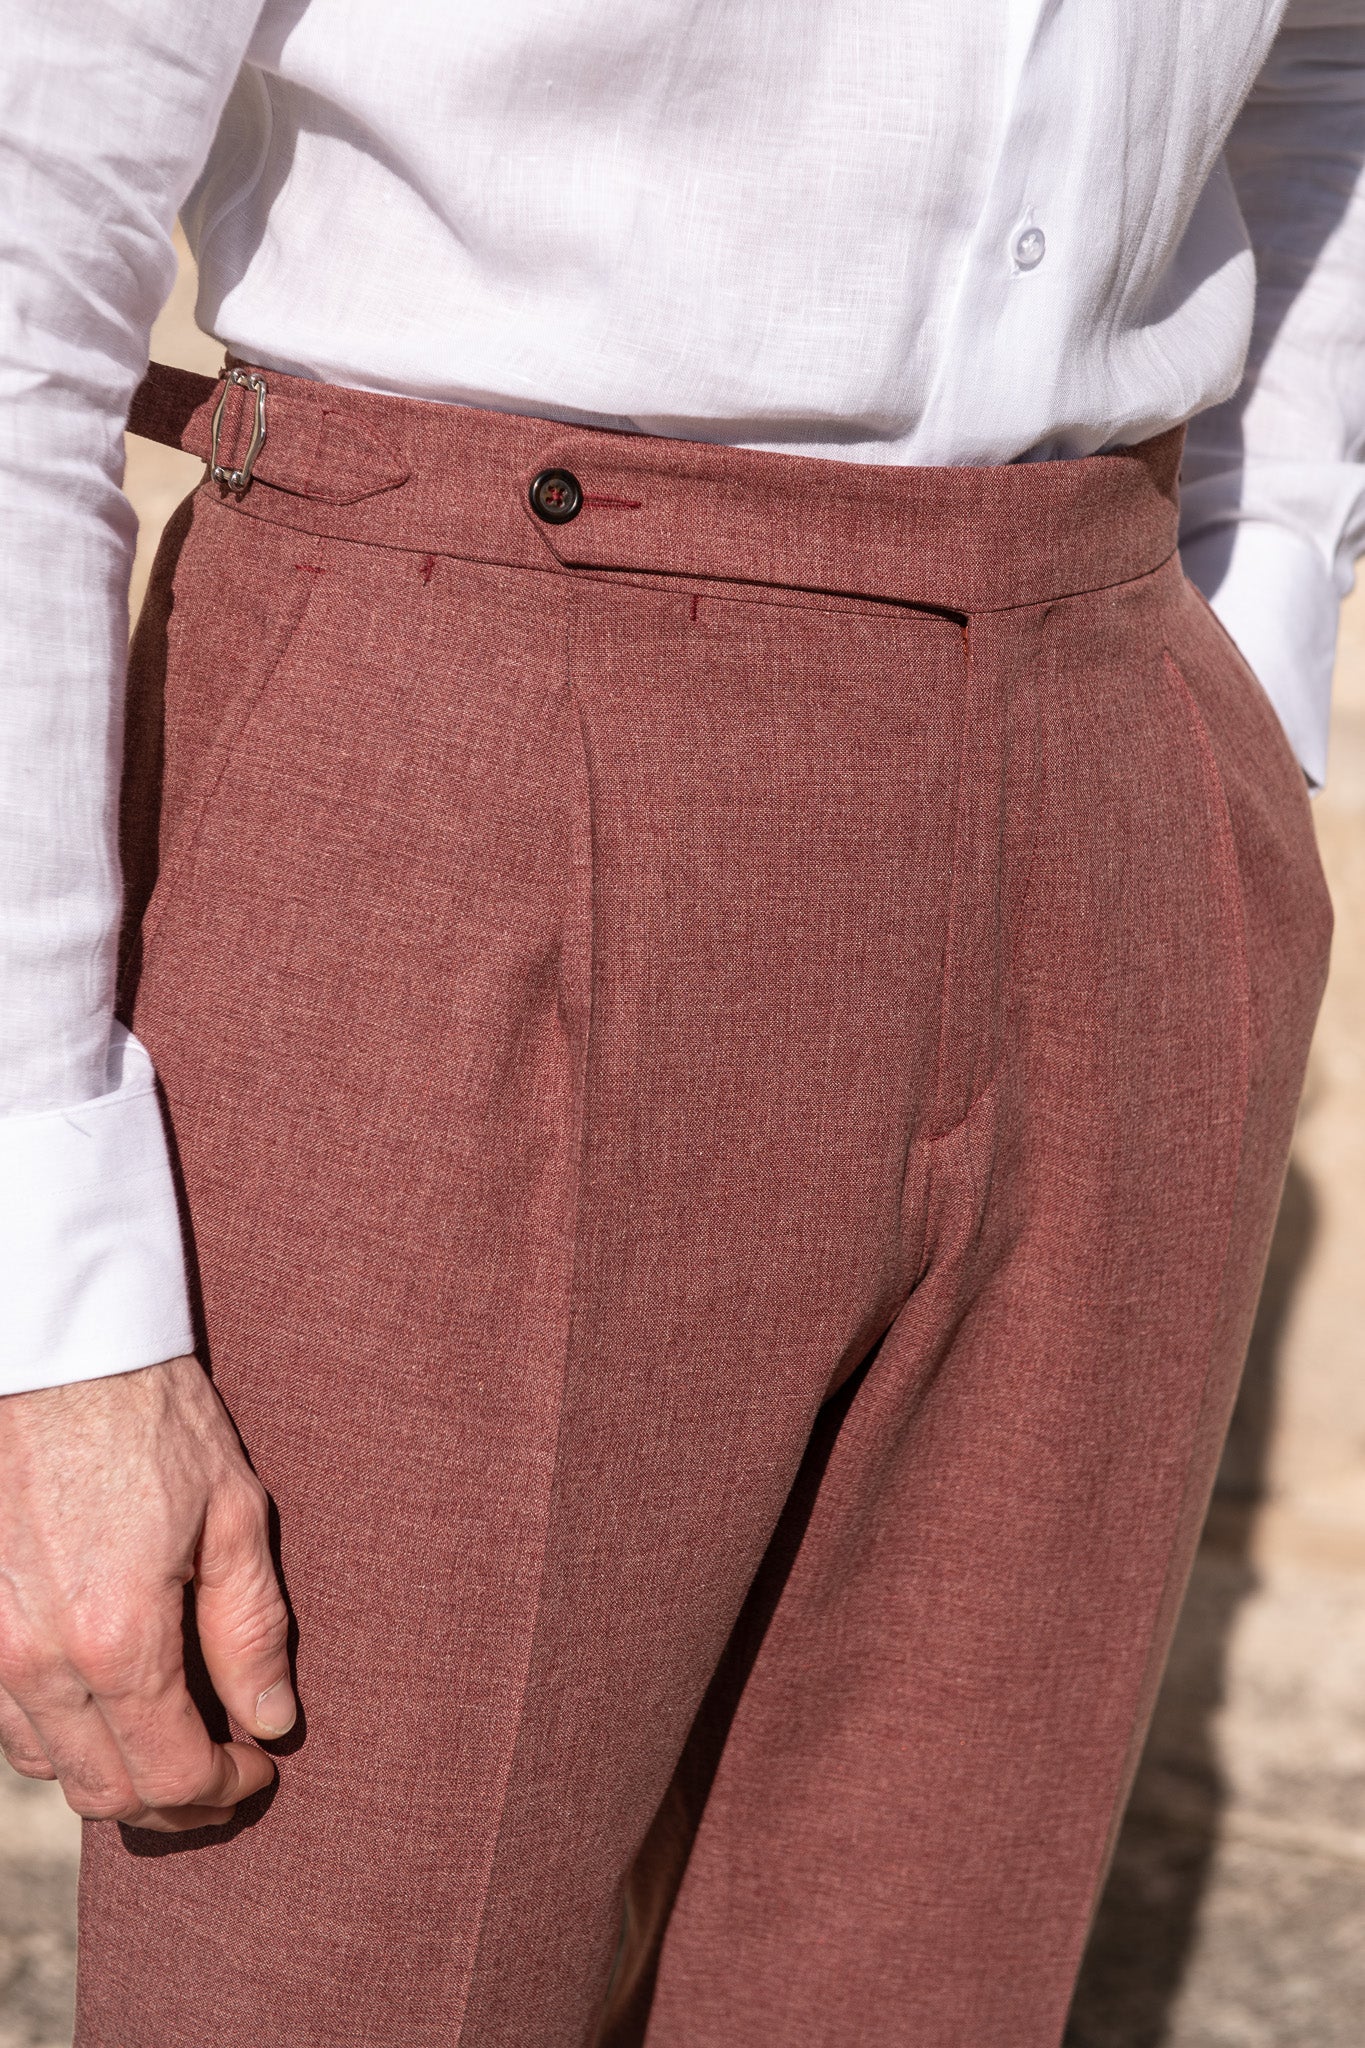 Coral Biella trousers - Made in Italy